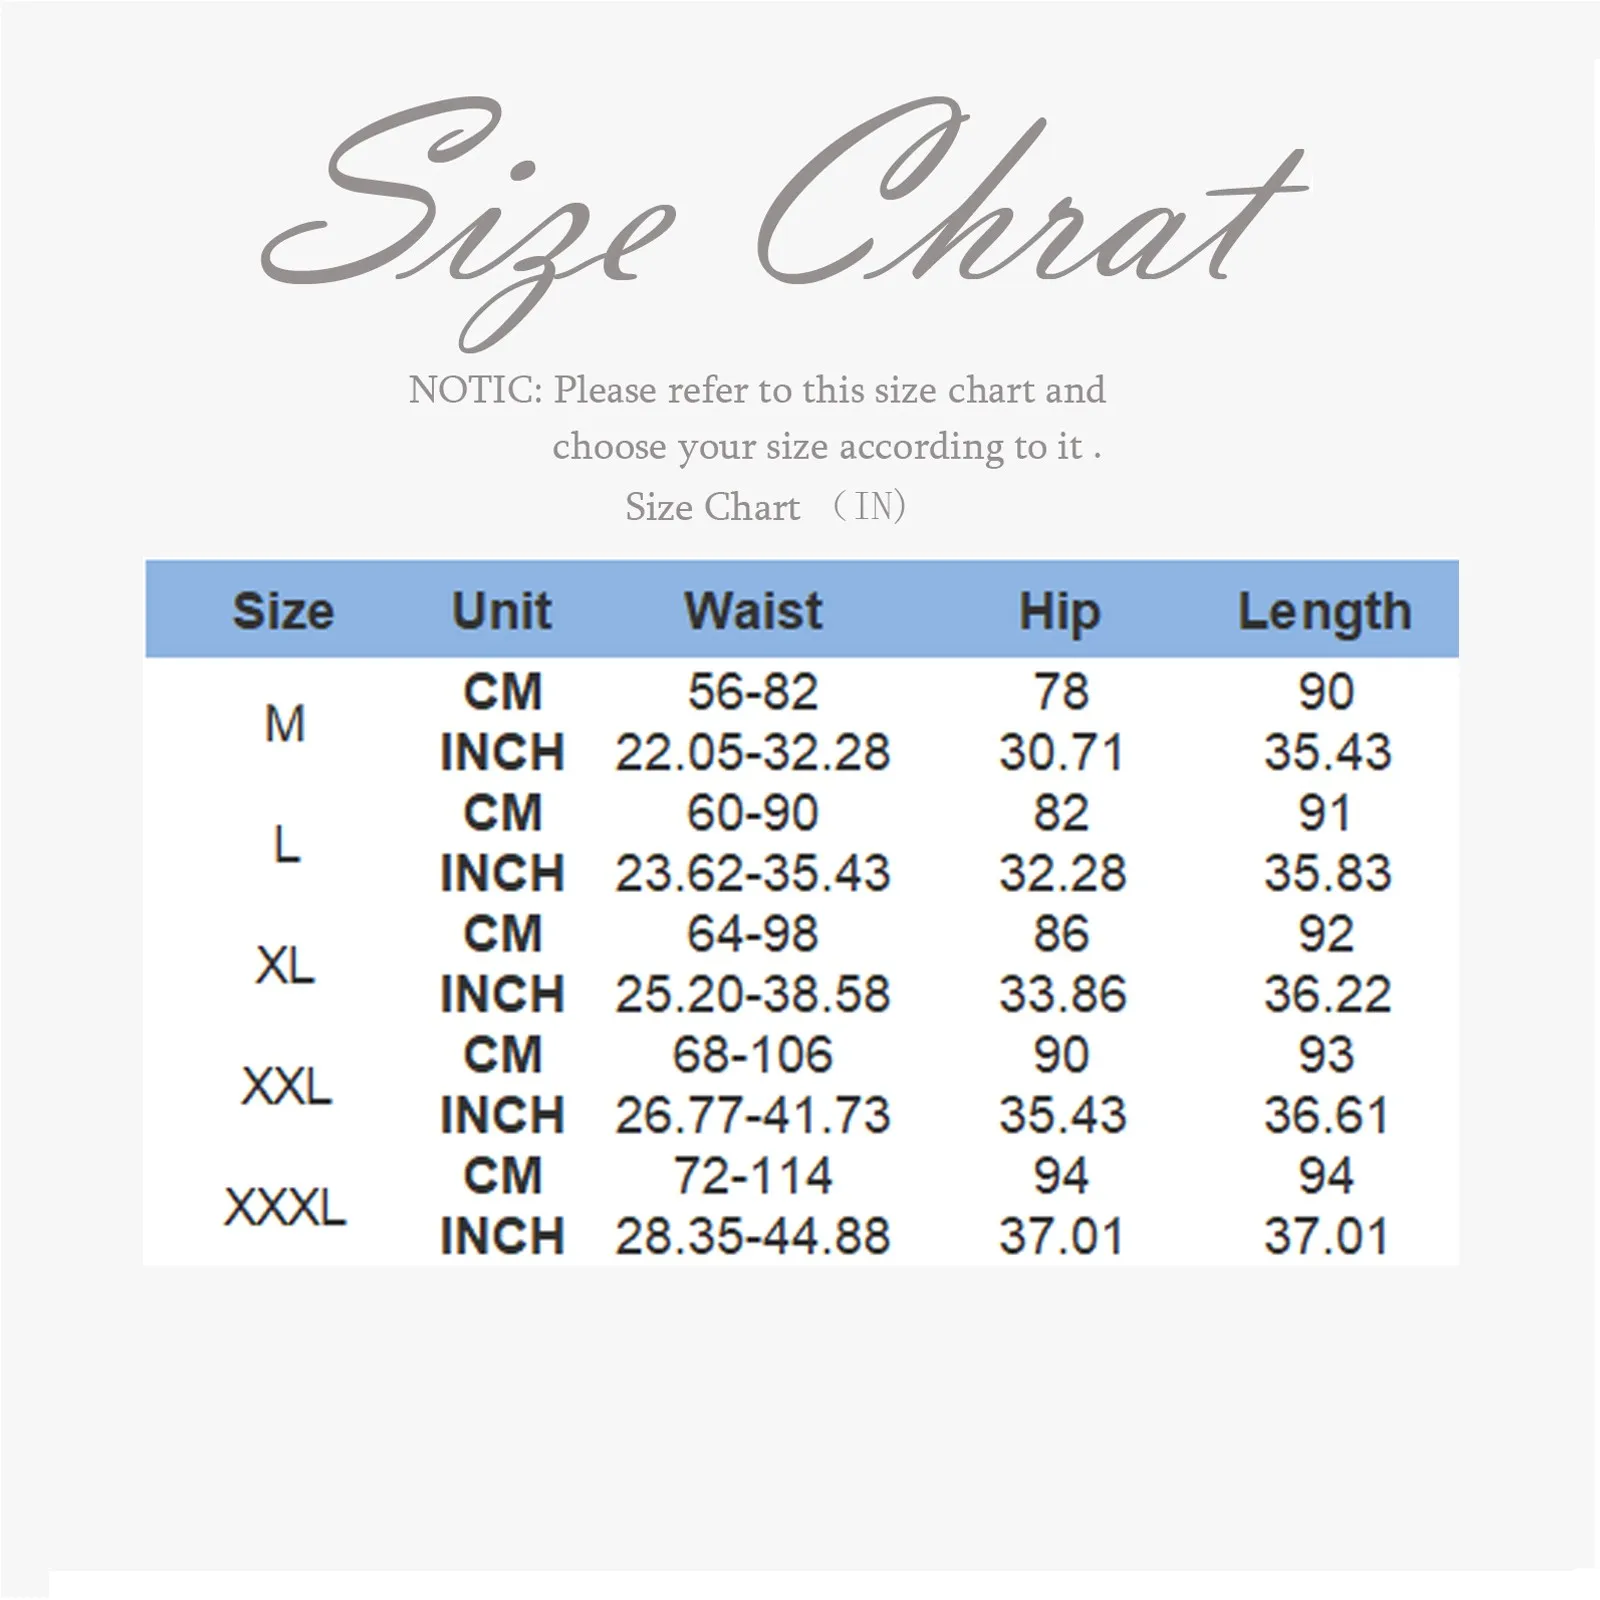 Casual Warm Winter Solid Pants, Soft Clouds Fleece Leggings for